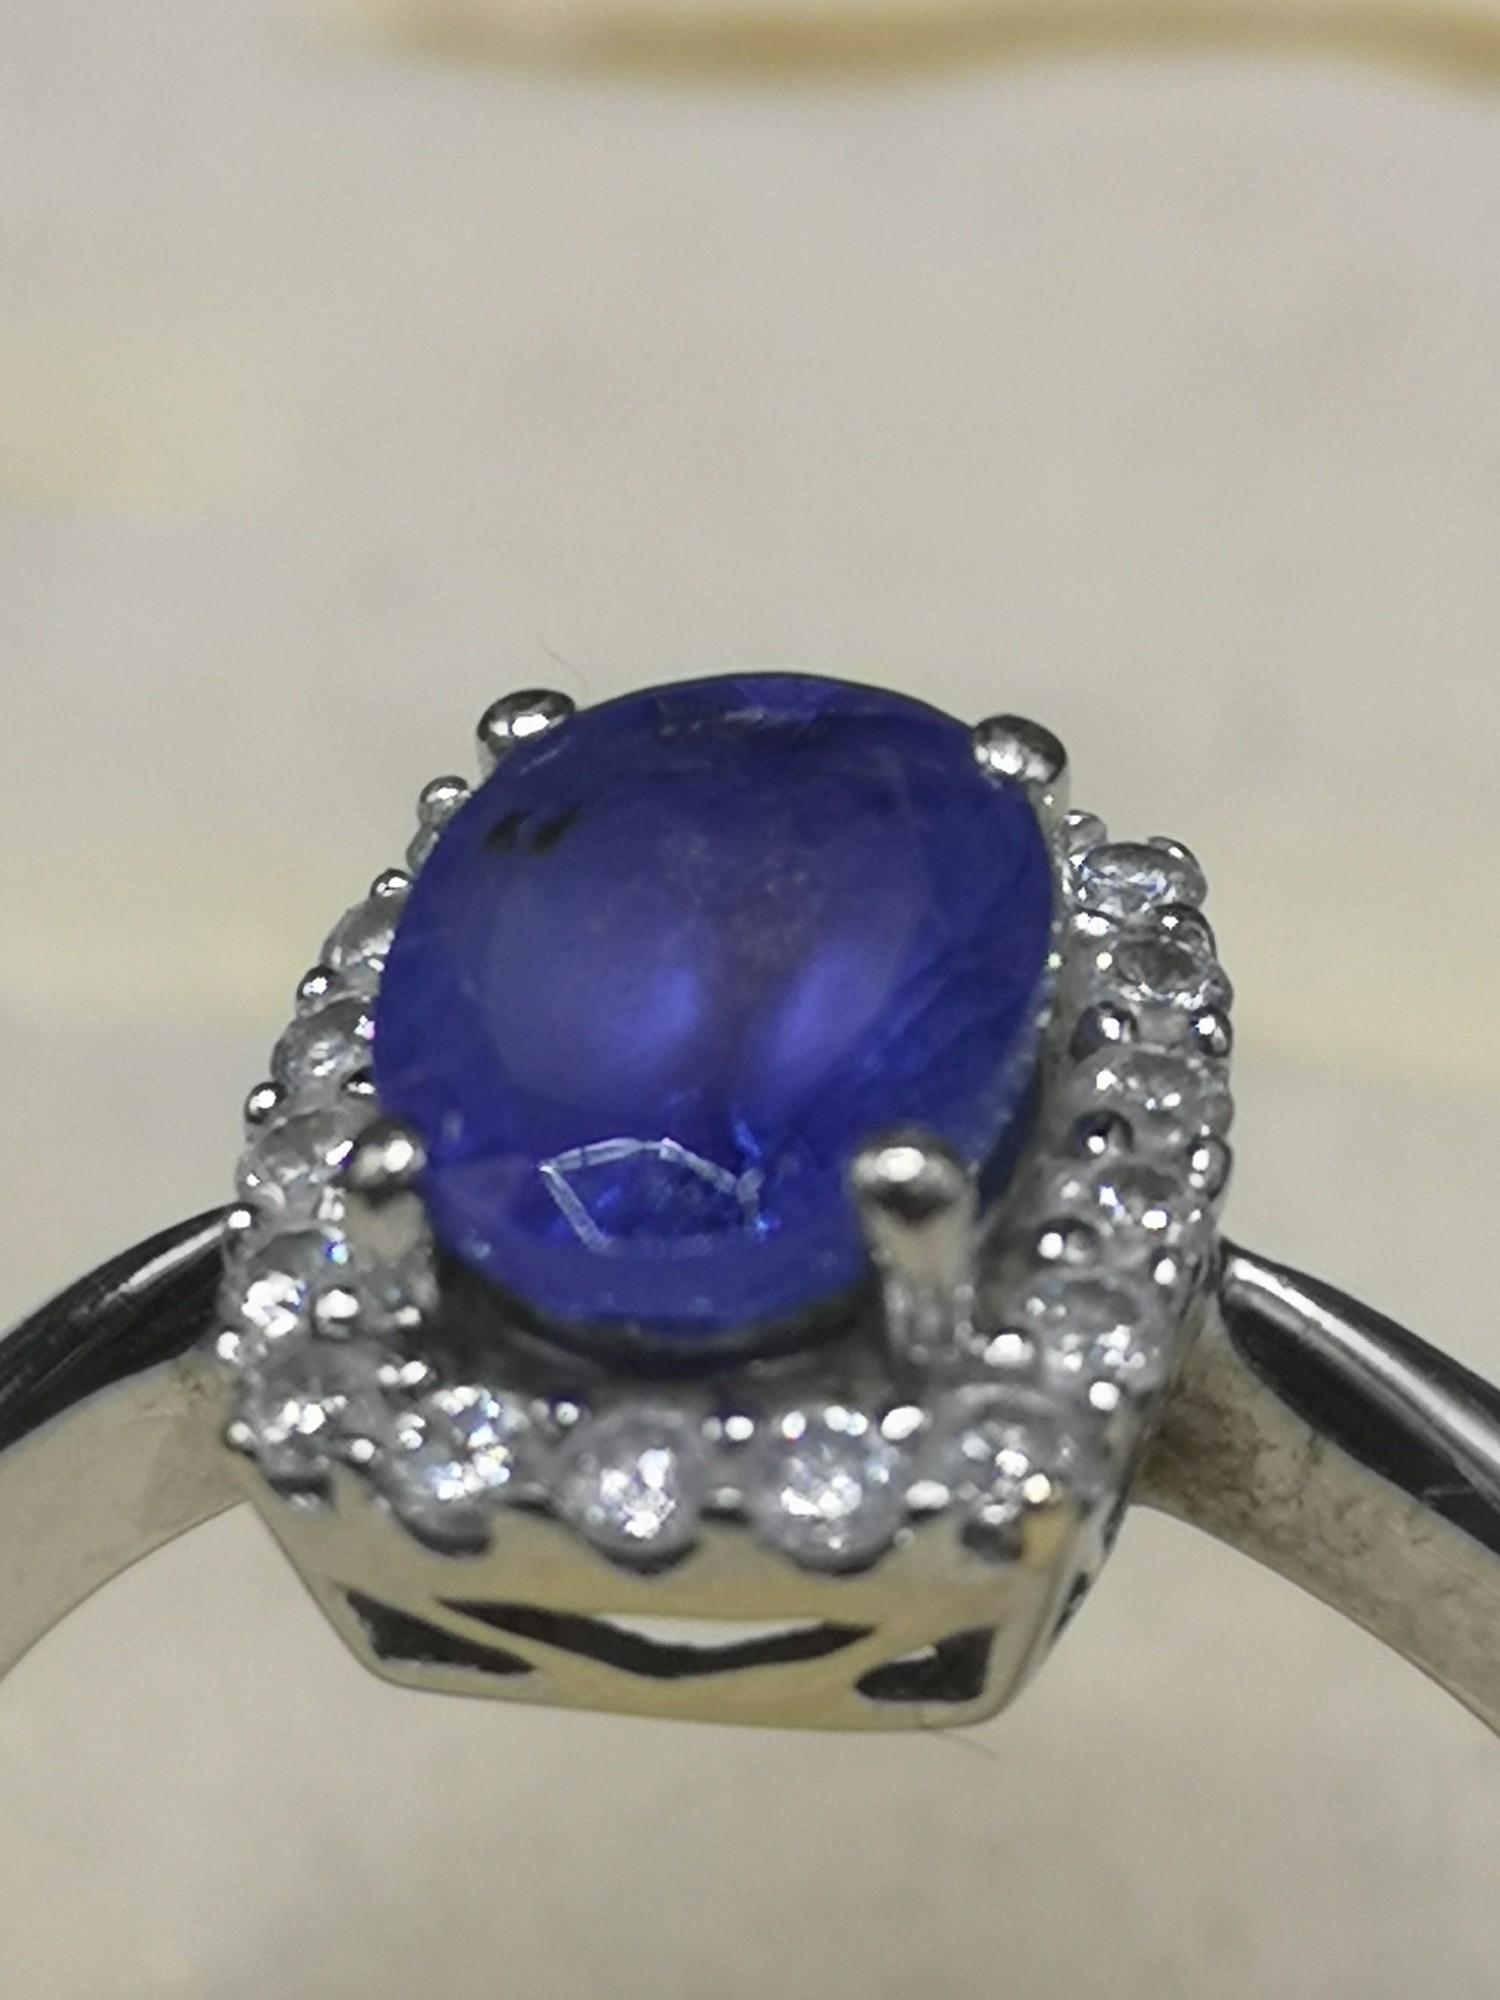 14kt white gold diamond and blue stone ring. 3.3 grams. - Image 2 of 2